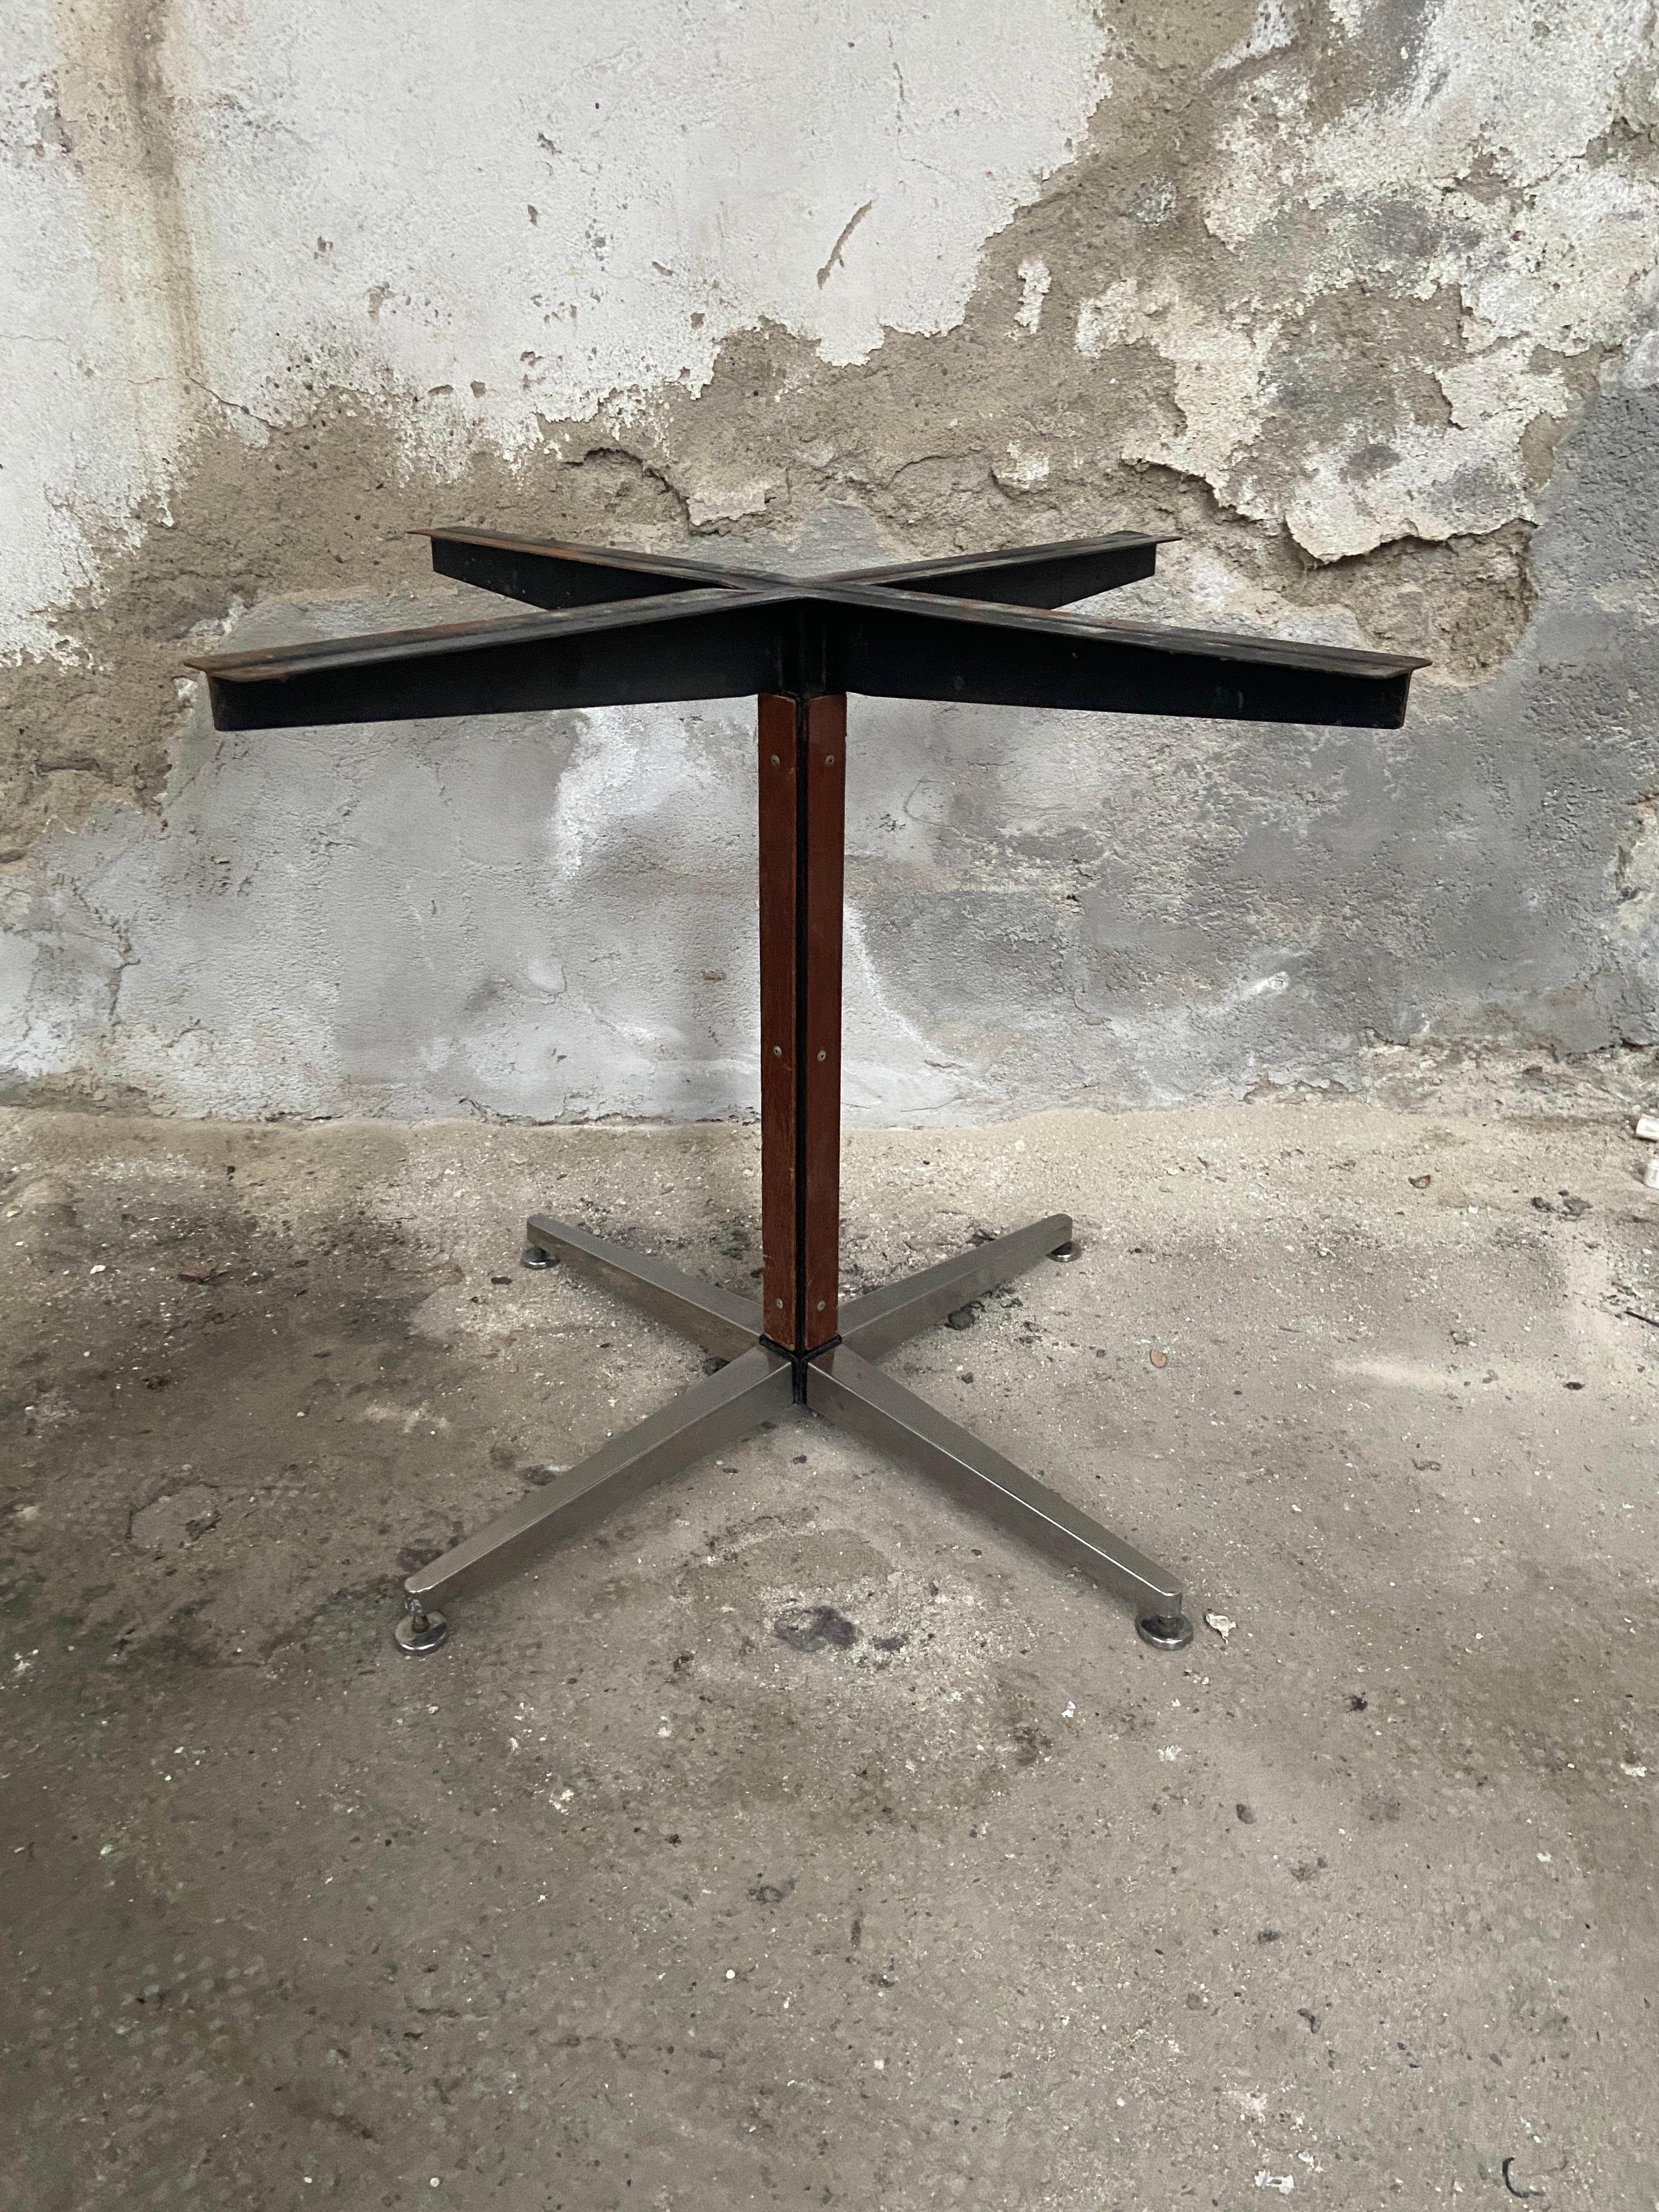 Mid-Century Modern Italian Iron Table Base with Tripode Aluminum Legs and wooden inserts. 1970s
more pieces available.